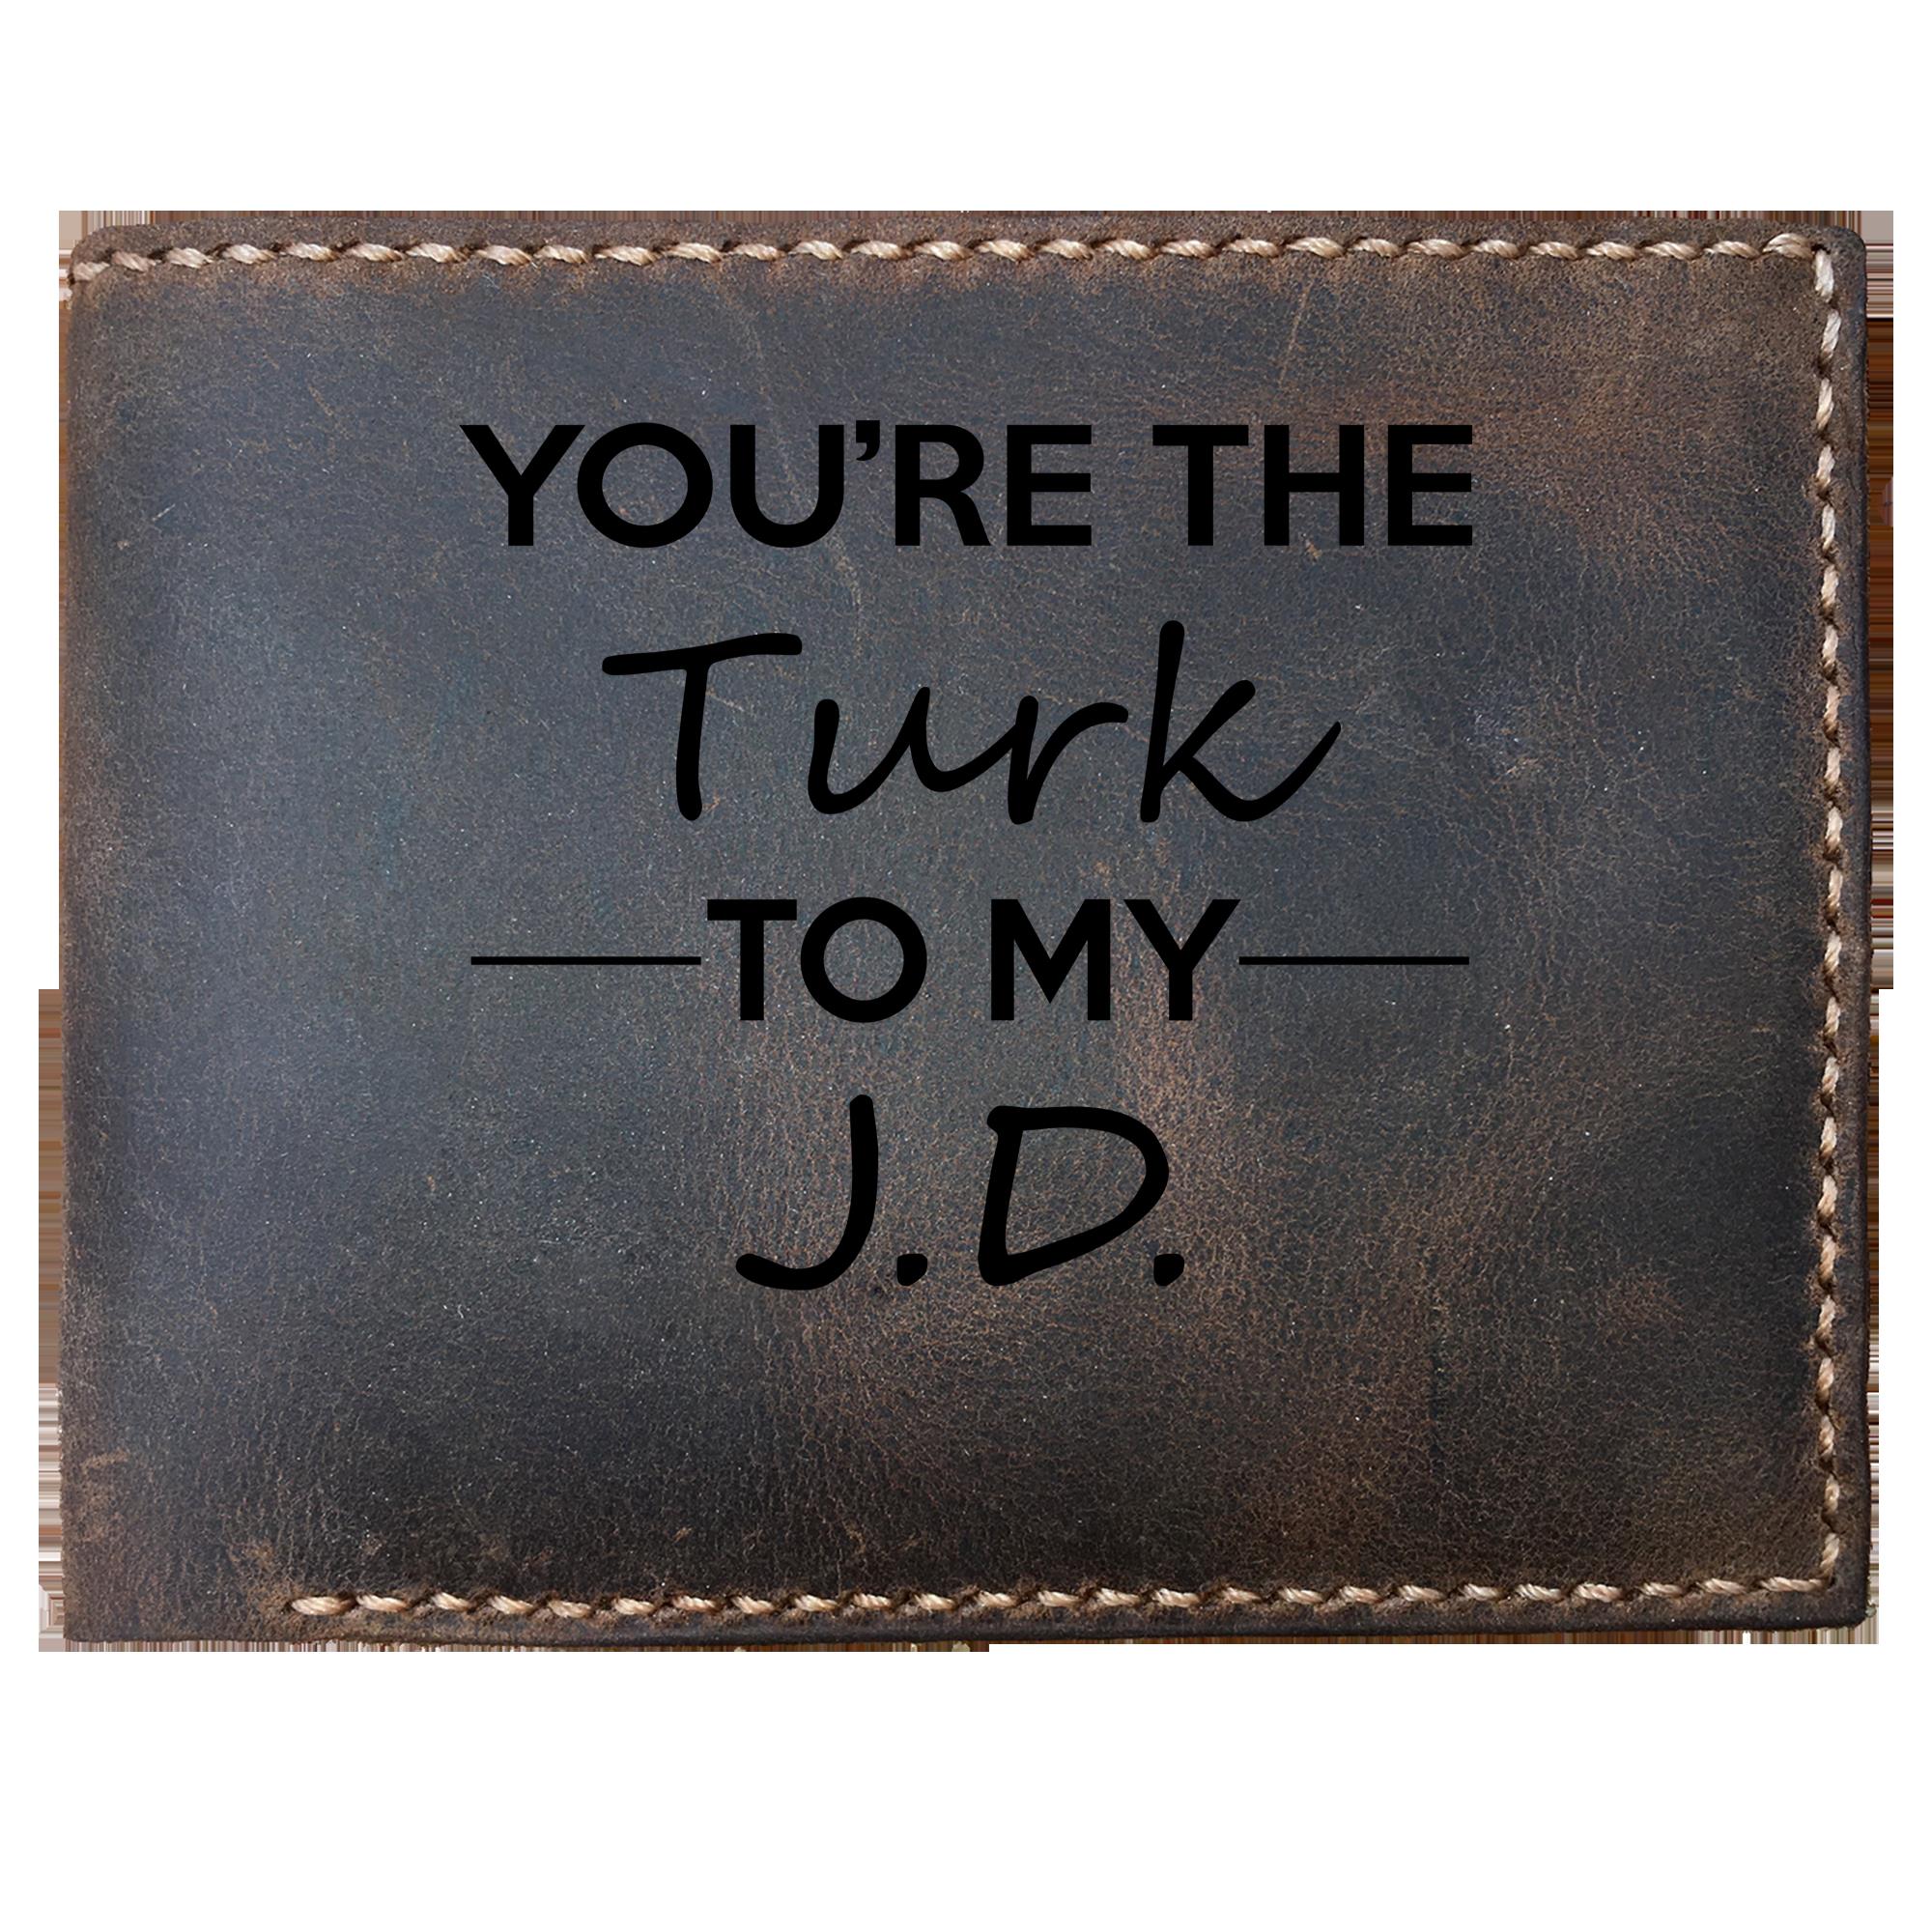 Skitongifts Funny Custom Laser Engraved Bifold Leather Wallet For Men, You Are The Turk To My J.D